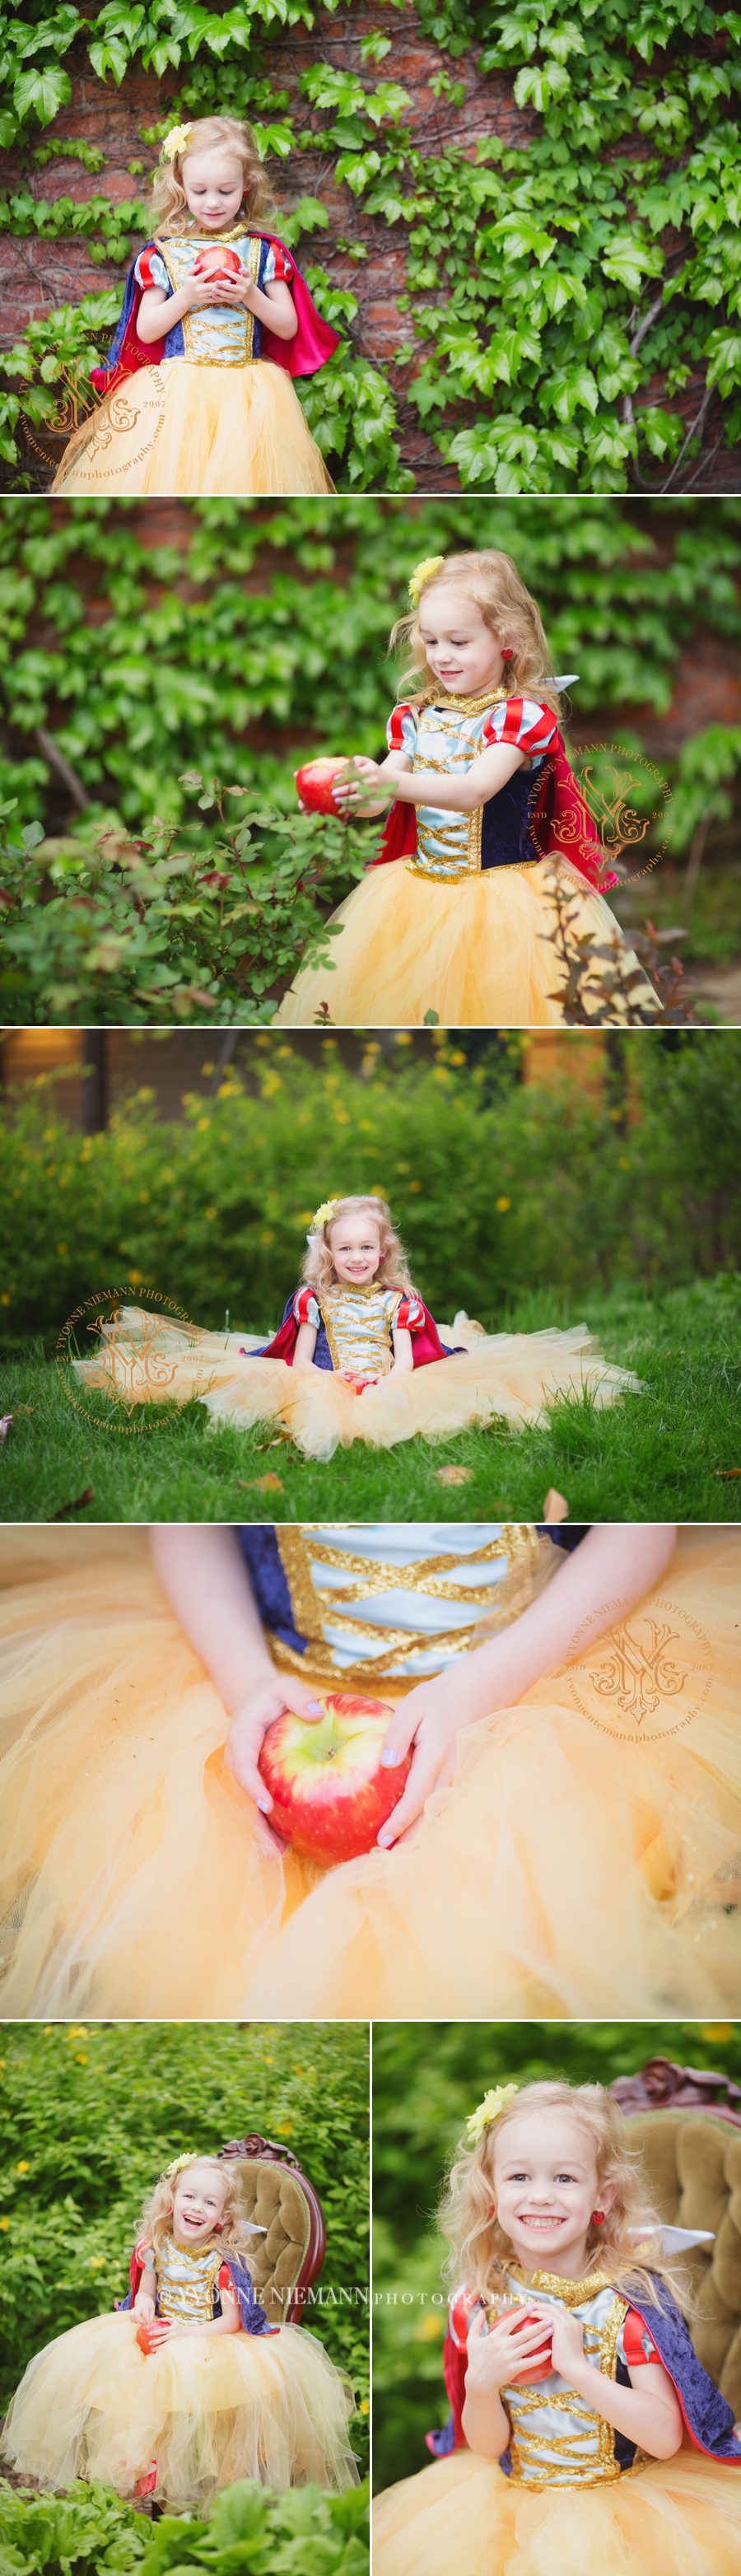 Fun child photography of a little girl dressed up at Snow White taken by Yvonne Niemann Photography in St. Charles, MO.